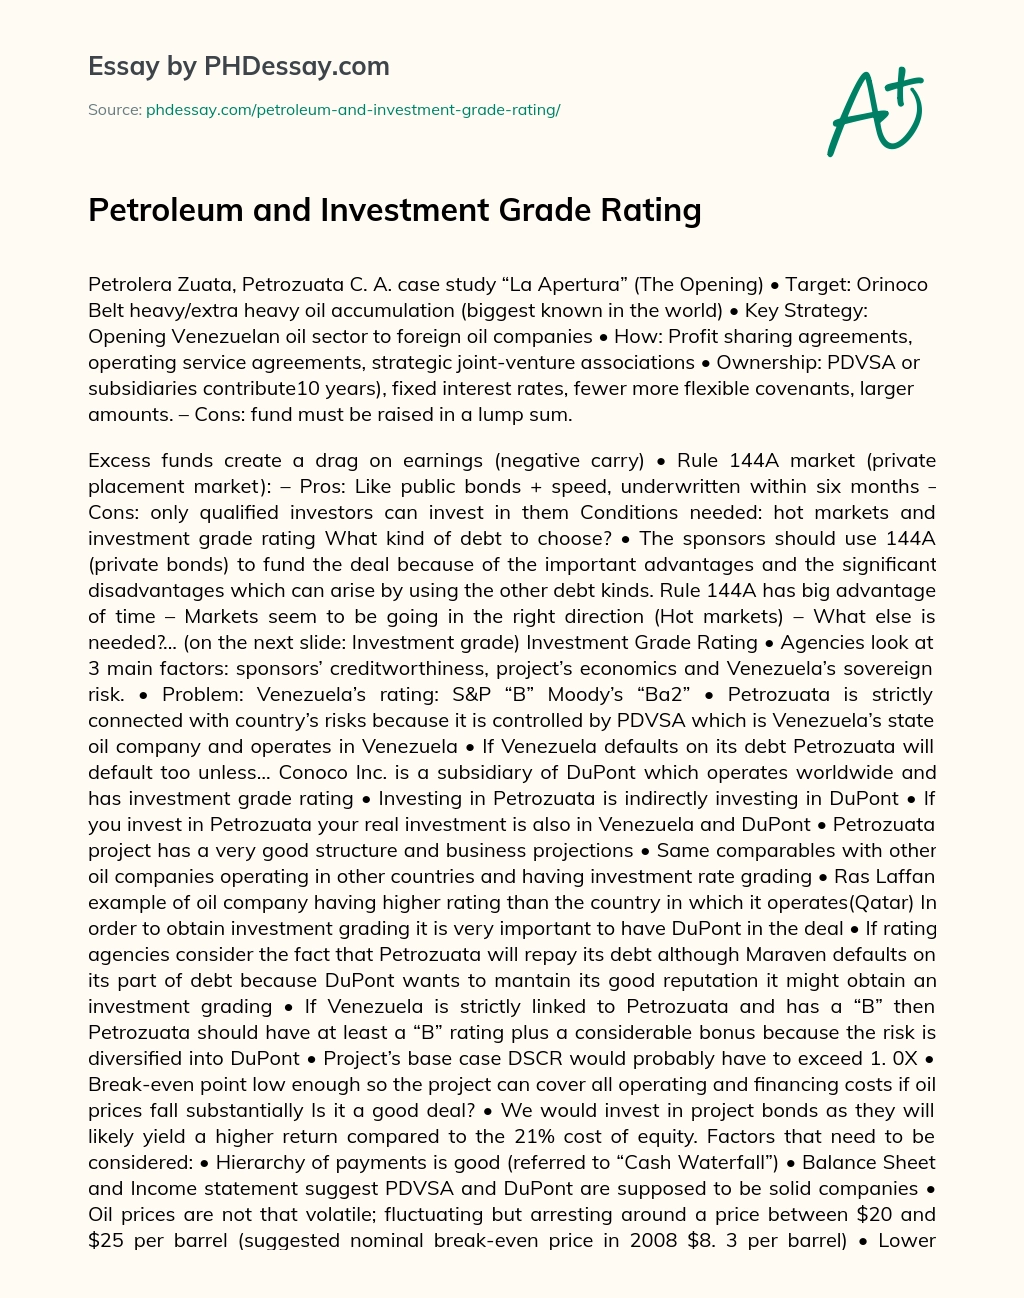 Petroleum and Investment Grade Rating essay